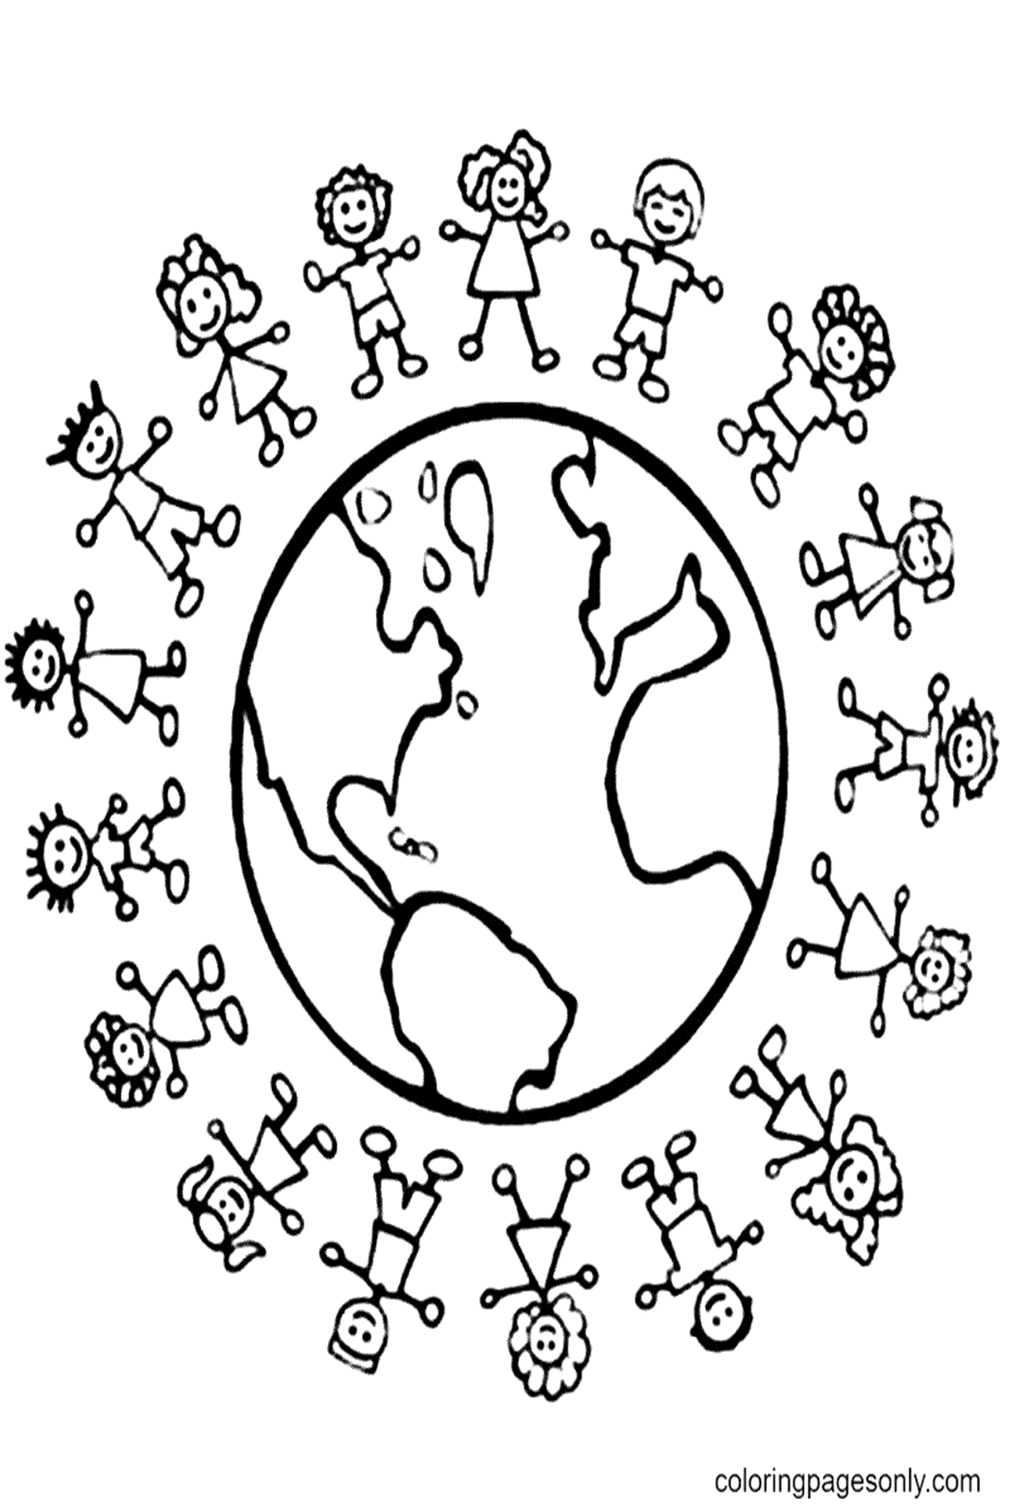 Day of Peace Coloring Page